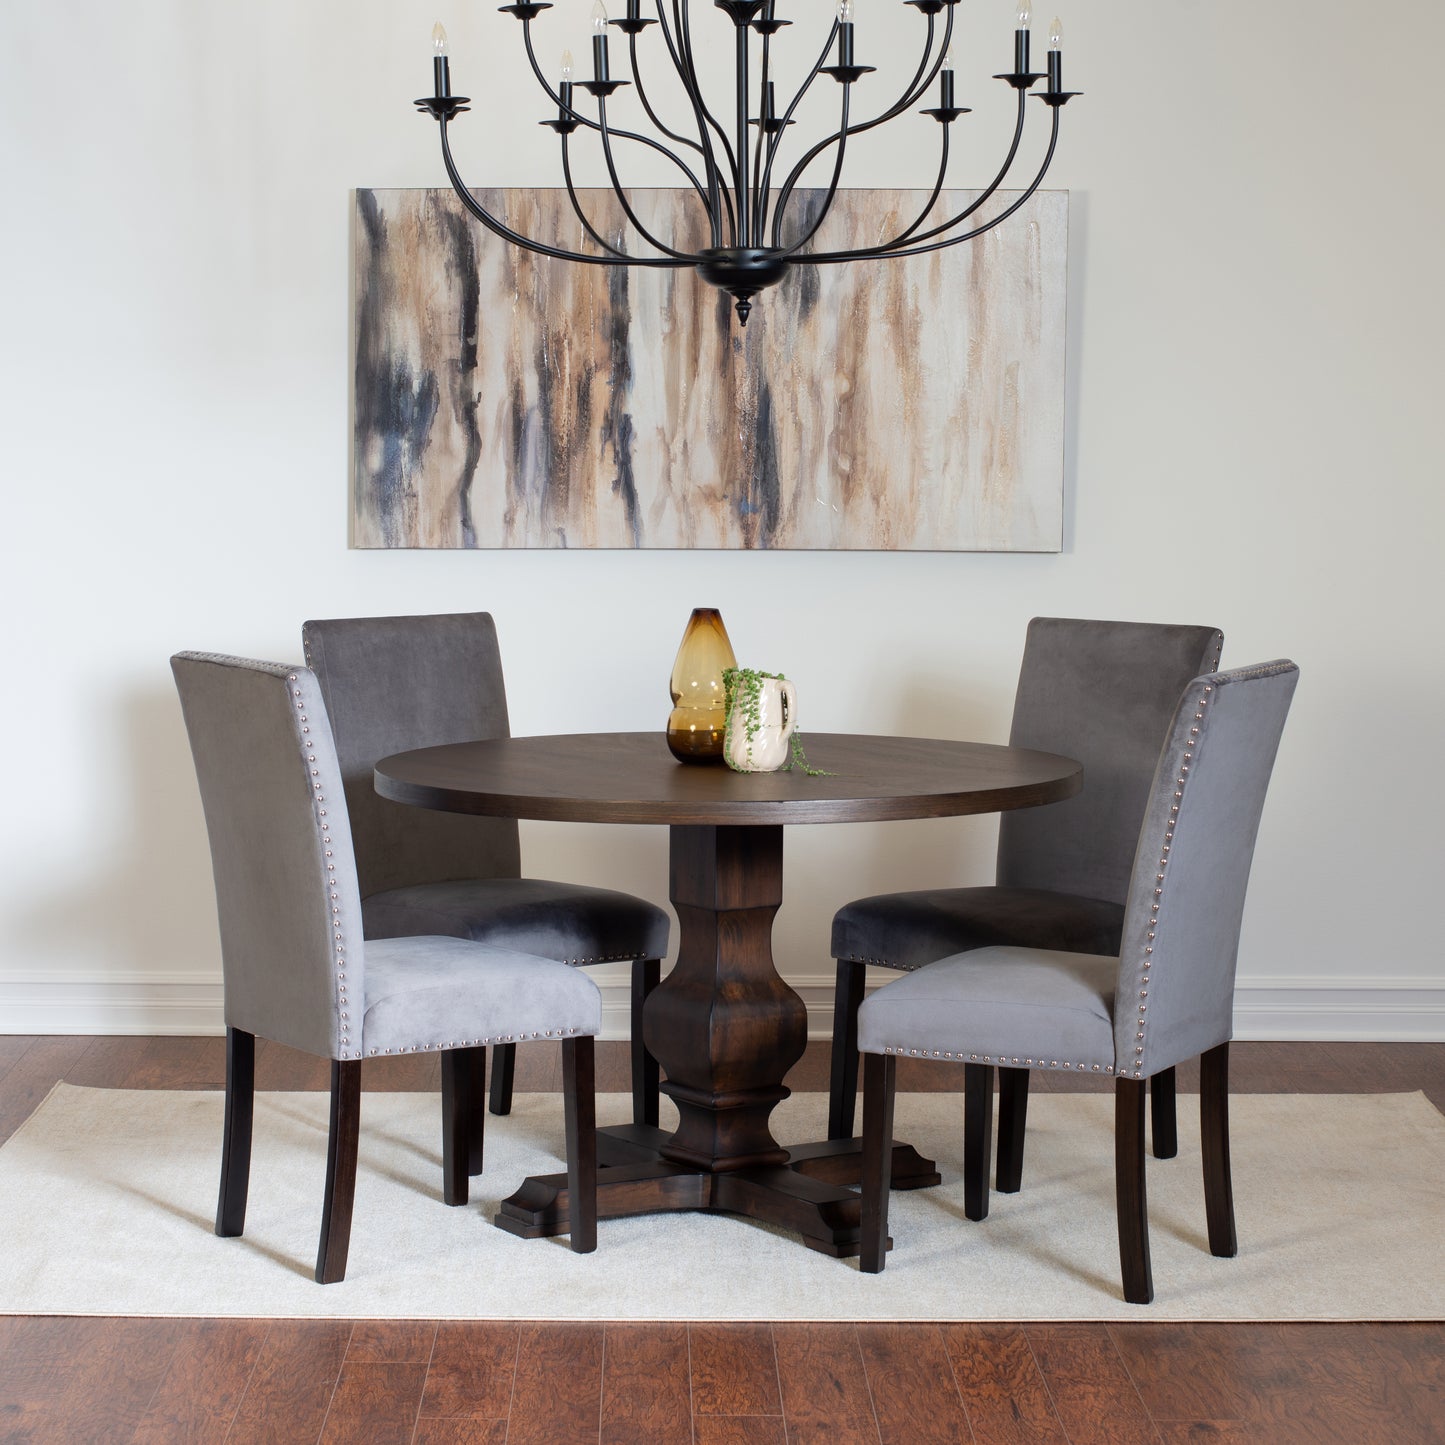 Fordsville 5-piece Dining Set, Pedestal Round Table with 4 Stylish Chairs